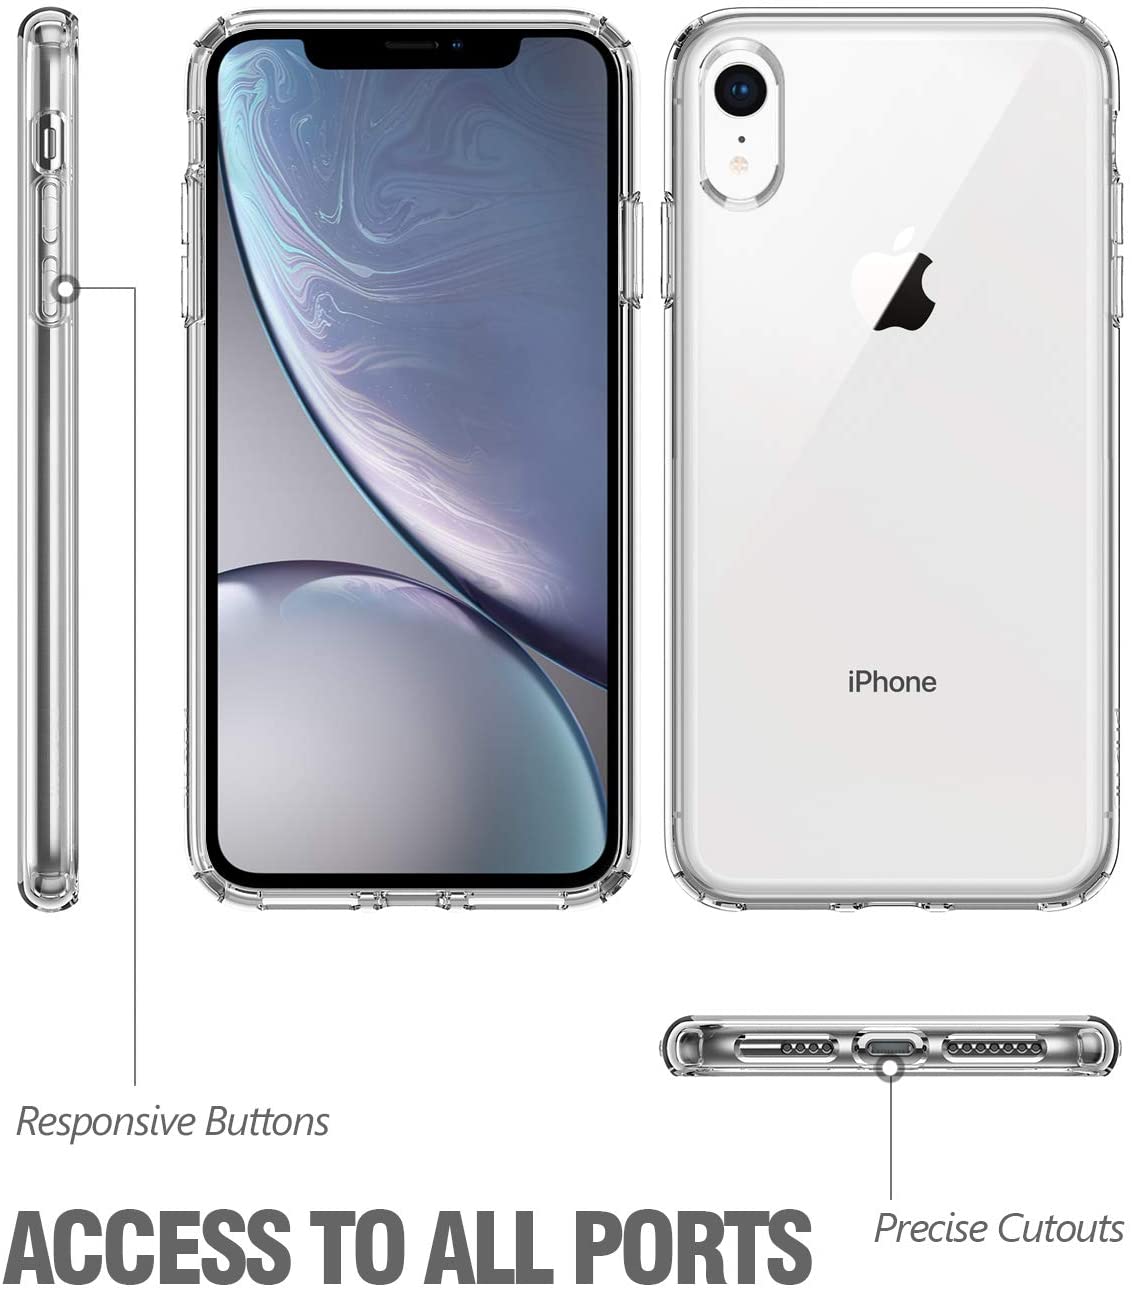 iPhone XR Clear Case, Poetic Lumos Flexible Soft Transparent Ultra-Thin Impact Resistant TPU Case for Apple iPhone XR 6.1" LCD Display - Crystal Clear - e4cents